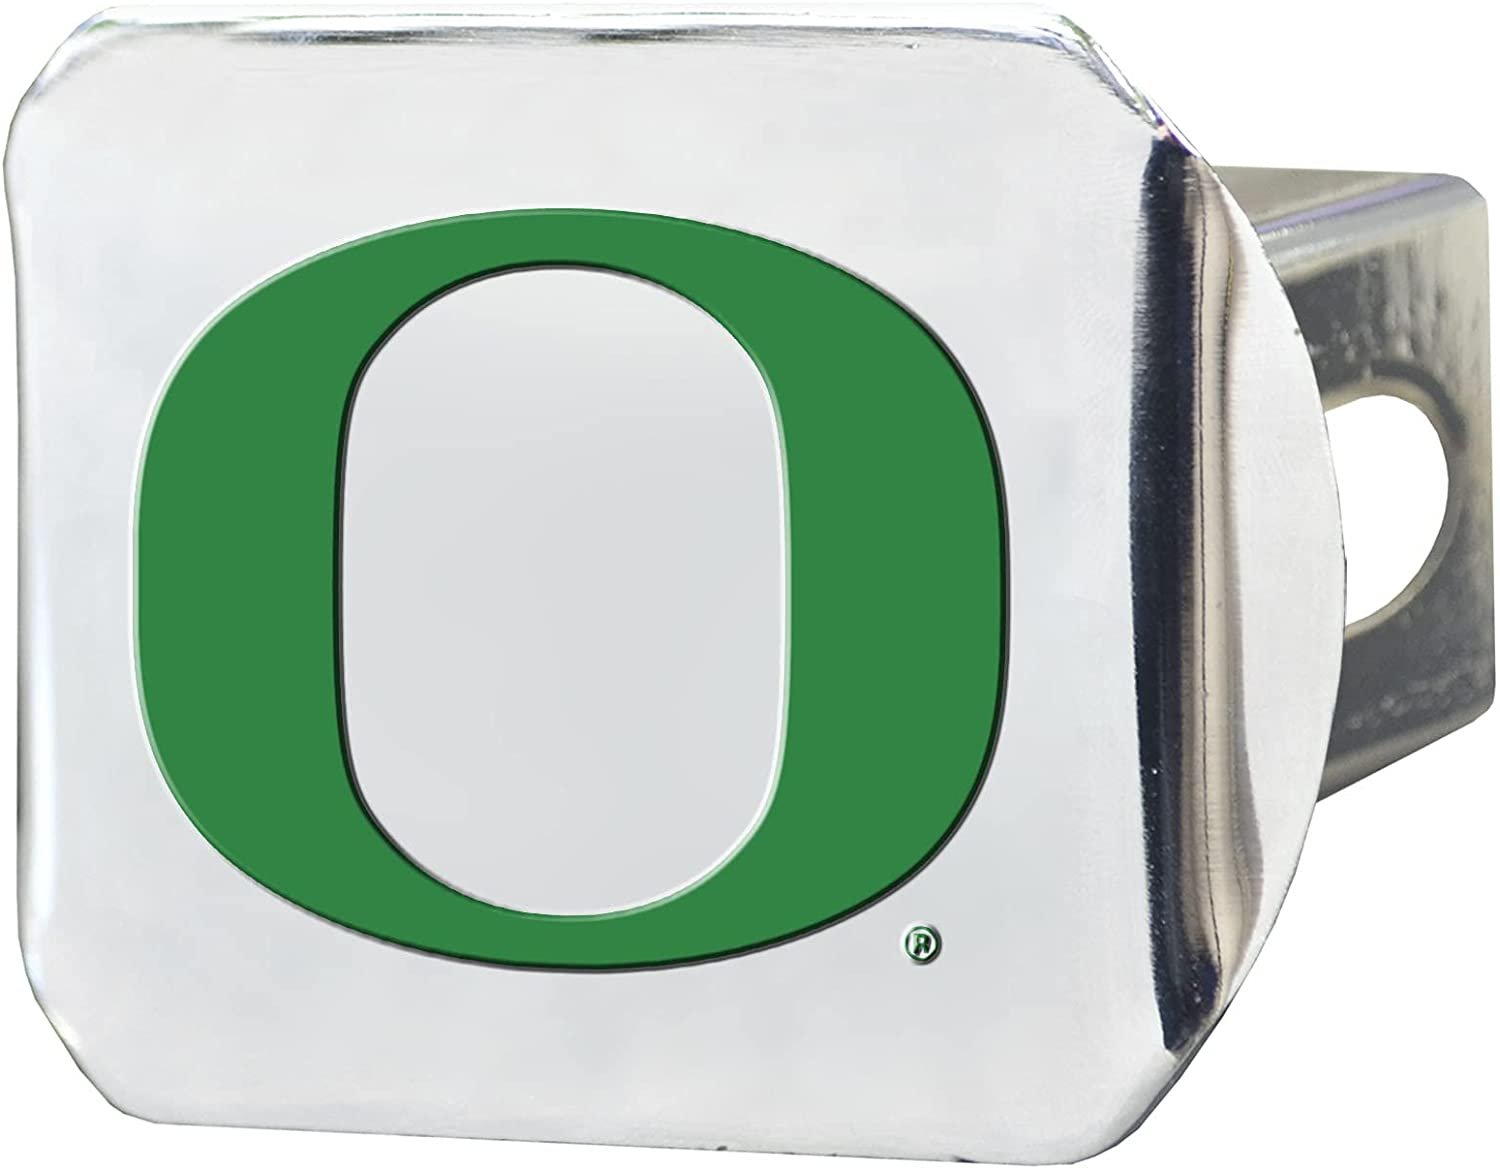 Oregon Ducks Hitch Cover Solid Metal with Raised Color Metal Emblem 2" Square Type III University of